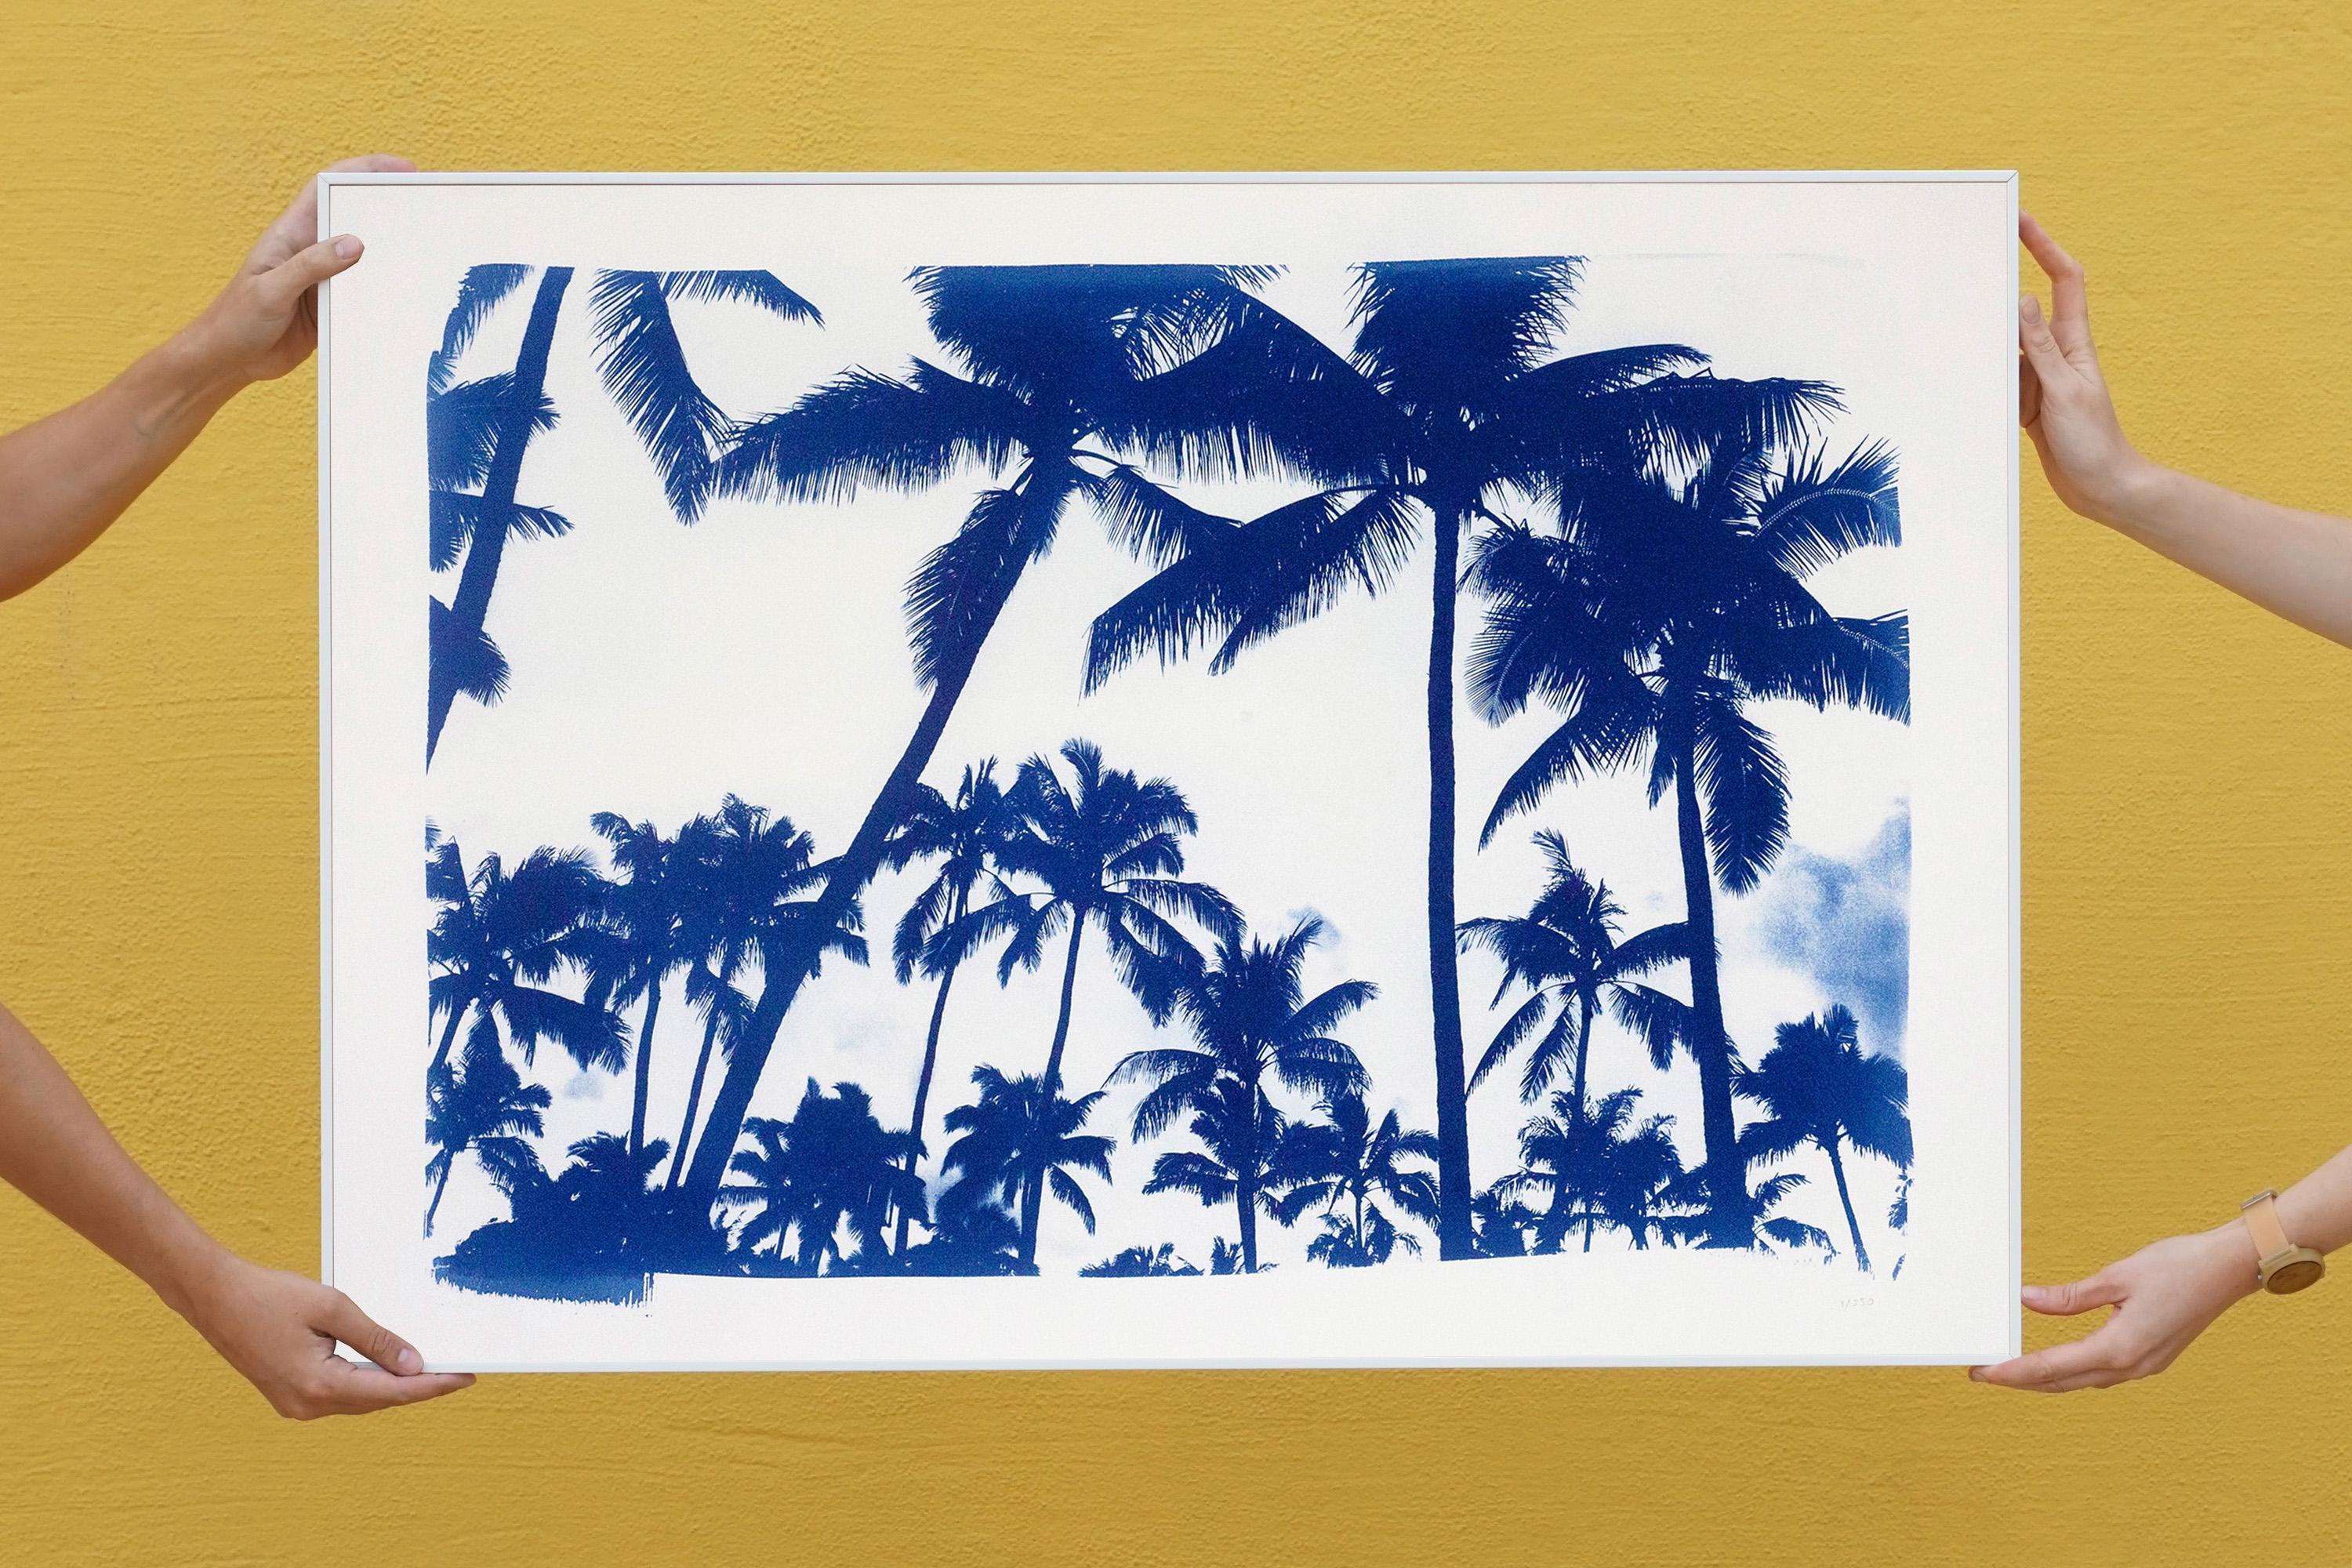 Acapulco Palm Sunset, Cyanotype on Watercolor Paper, 100x70cm, Limited Edition  2